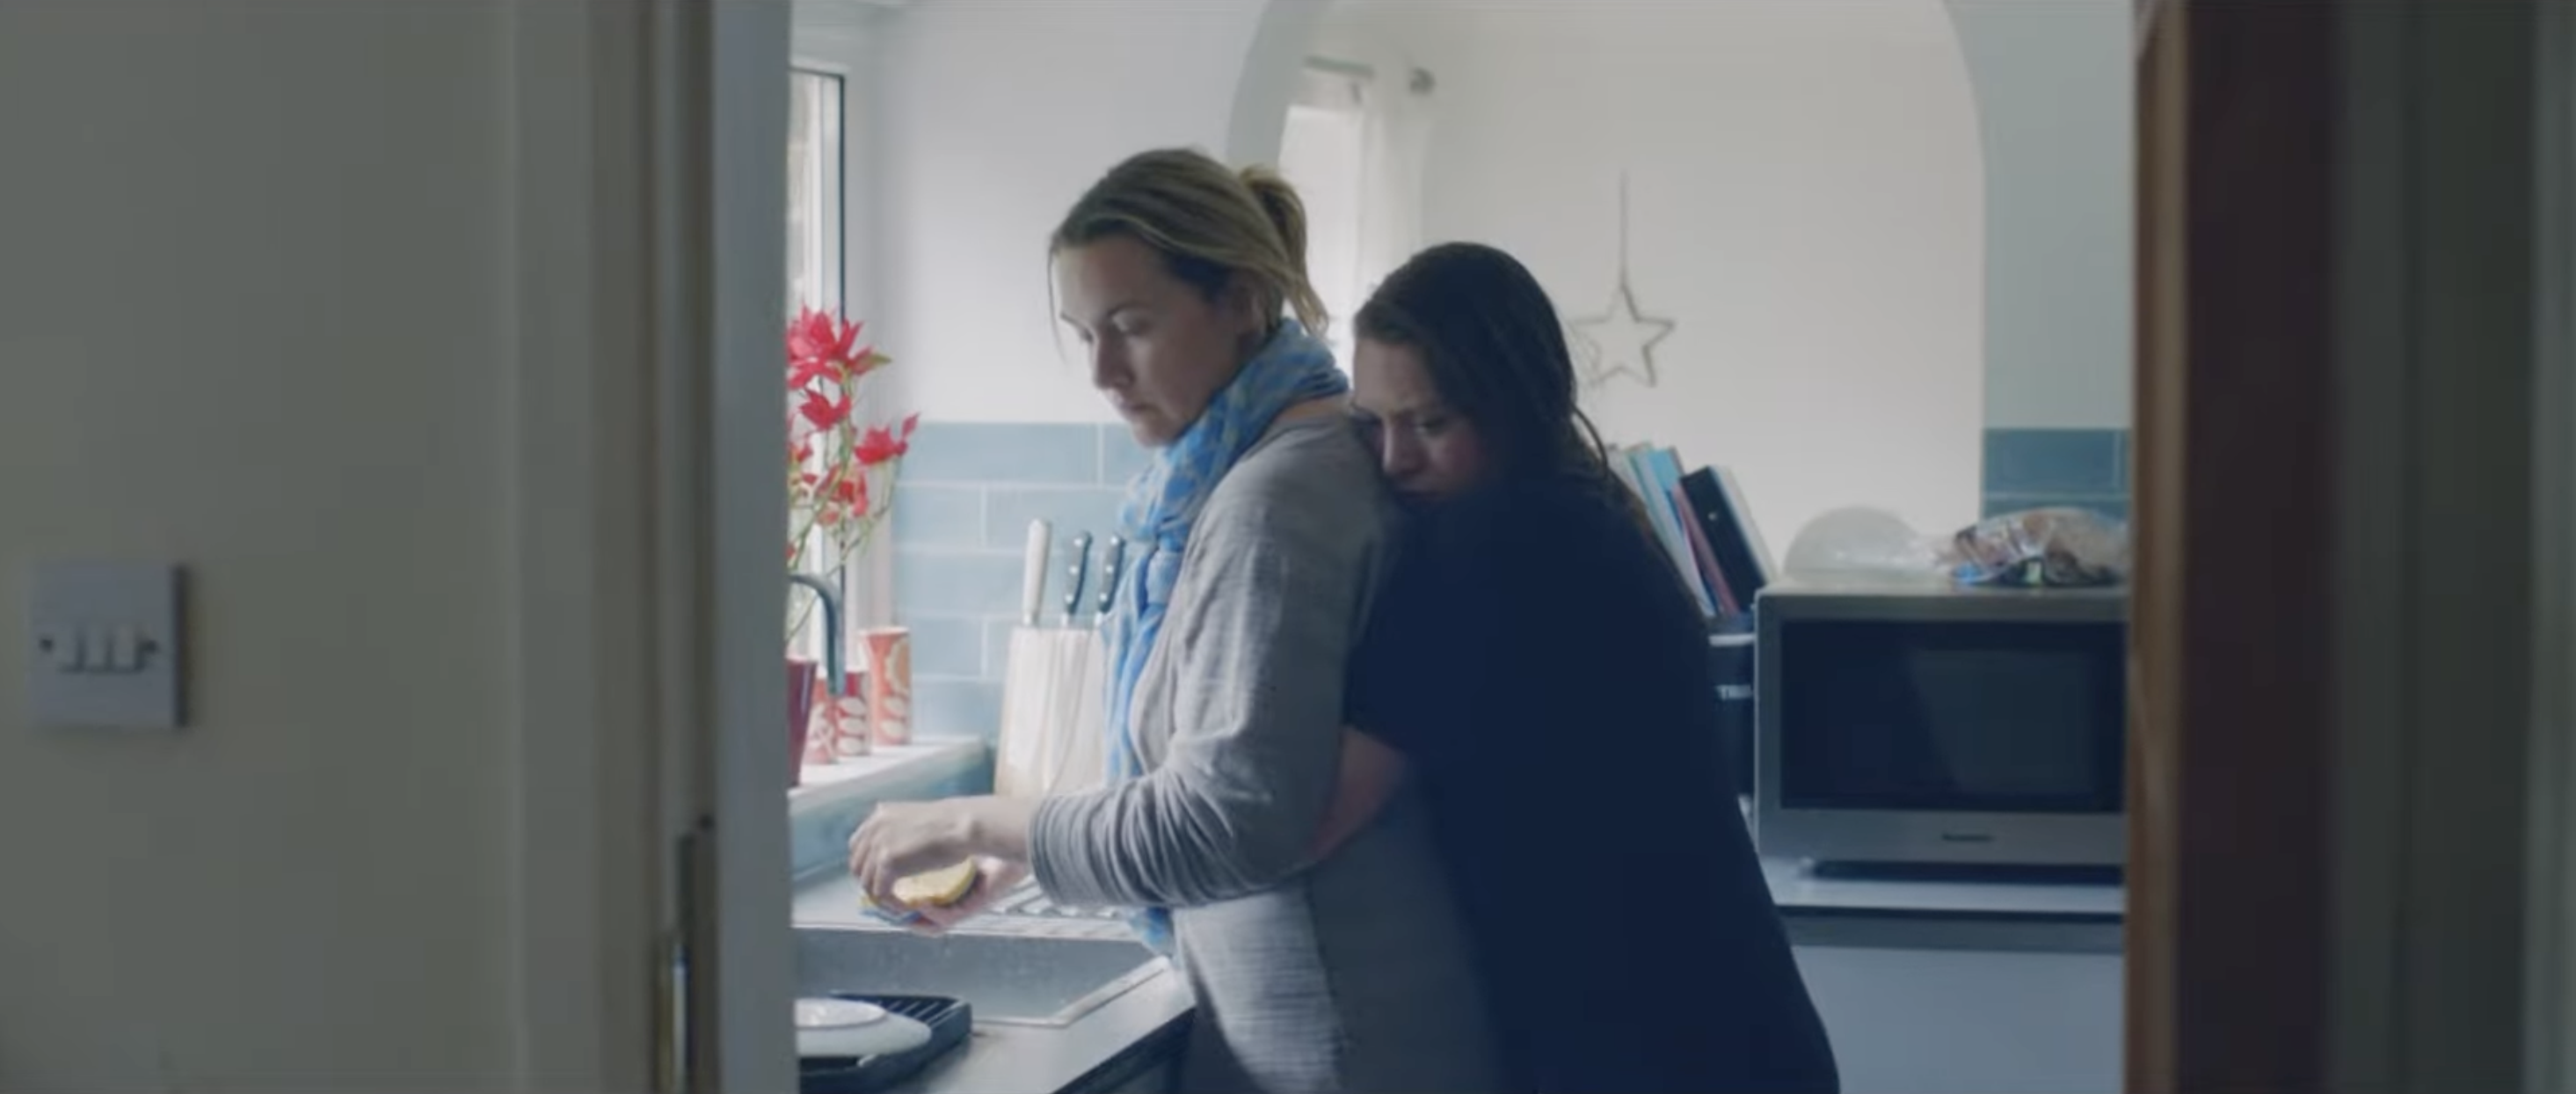 Two women embracing in a kitchen, one appears to be consoling the other